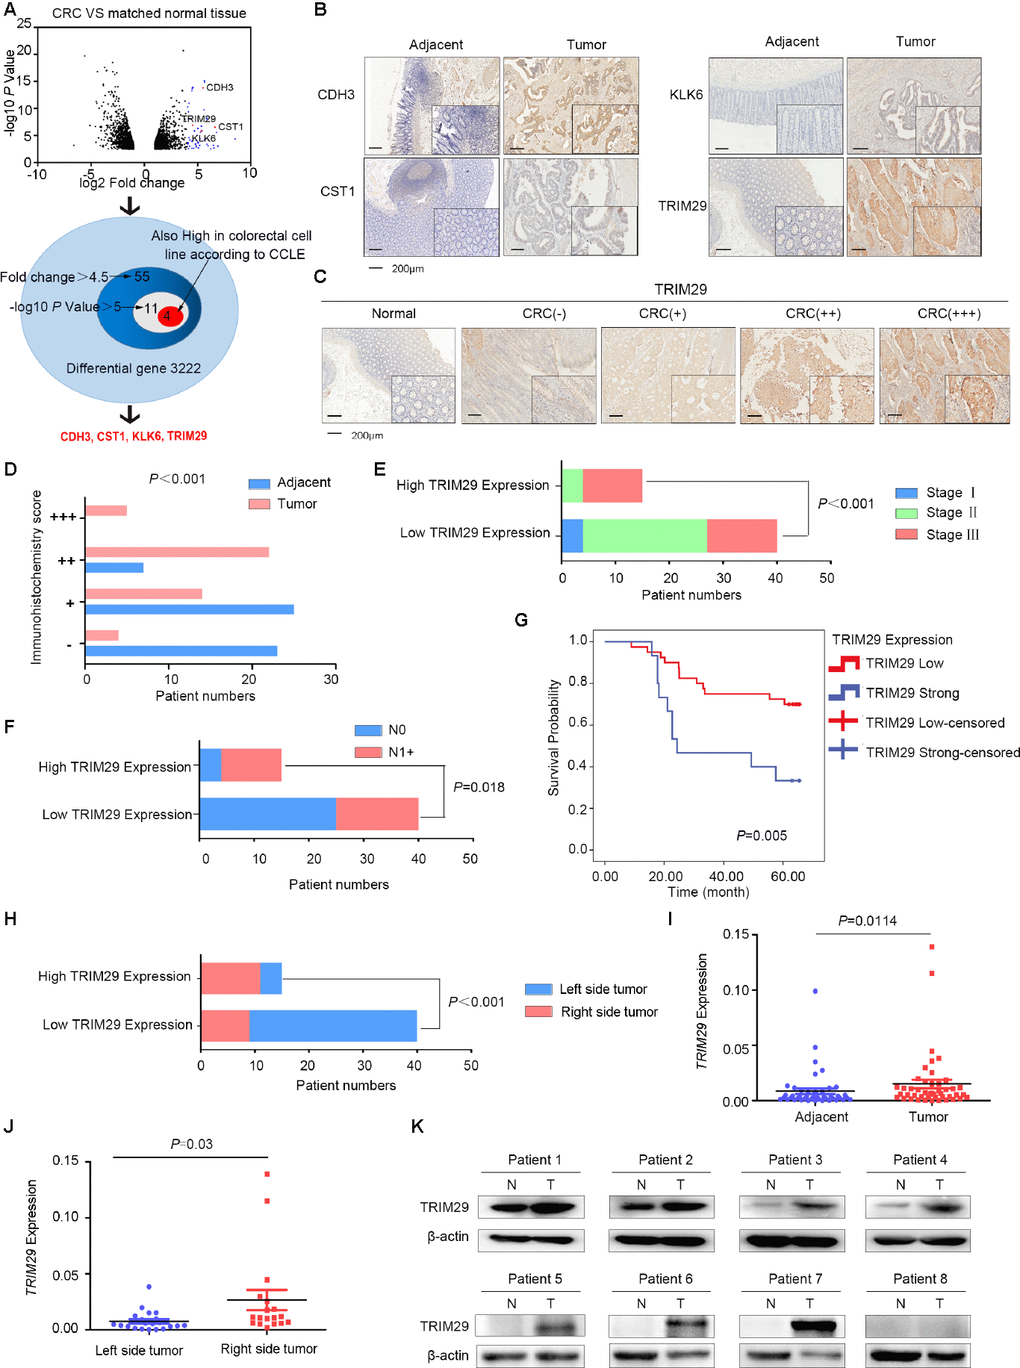 TRIM29 is upregulated in colorectal cancer. (A) The expression of CDH3, CST1, KLK6 and TRIM29 is upregulated in colorectal cancer (CRC) tissues and cell lines. (B) Immunohistochemistry (IHC) results showed that CDH3, CST1, KLK6 and TRIM29 expression was upregulated in CRC. (C) Representative IHC images of TRIM29 expression. (D) Statistical data graph of patients with different TRIM29 expression levels in CRC tissues and noncancerous samples (PE) Statistical data graph of patients with or without lymph node metastasis stratified by TRIM29 expression level (P=0.018). (F) Statistical data graph of patients at different stages stratified by TRIM29 expression level (PG) Kaplan-Meier curves for CRC patients according to TRIM29 expression levels. The statistical analysis was performed using the chi-square test (P=0.005). (H) IHC results showed that TRIM29 is expressed at much higher levels in RSCC than in LSCC (PI) qPCR was used to measure the relative expression levels of TRIM29 in CRC samples and their matched noncancerous samples (PJ) The qPCR results showed that TRIM29 is expressed at much higher levels in RSCC than in LSCC (PK) Western blotting was used to detect TRIM29 expression in 8 pairs of samples. The statistical analysis was performed using the chi-square test (D–F, H) and two-tailed Student’s t-test (I, J). The error bars represent the SEM. Kaplan-Meier method compared with a log-rank test. *P P P P 